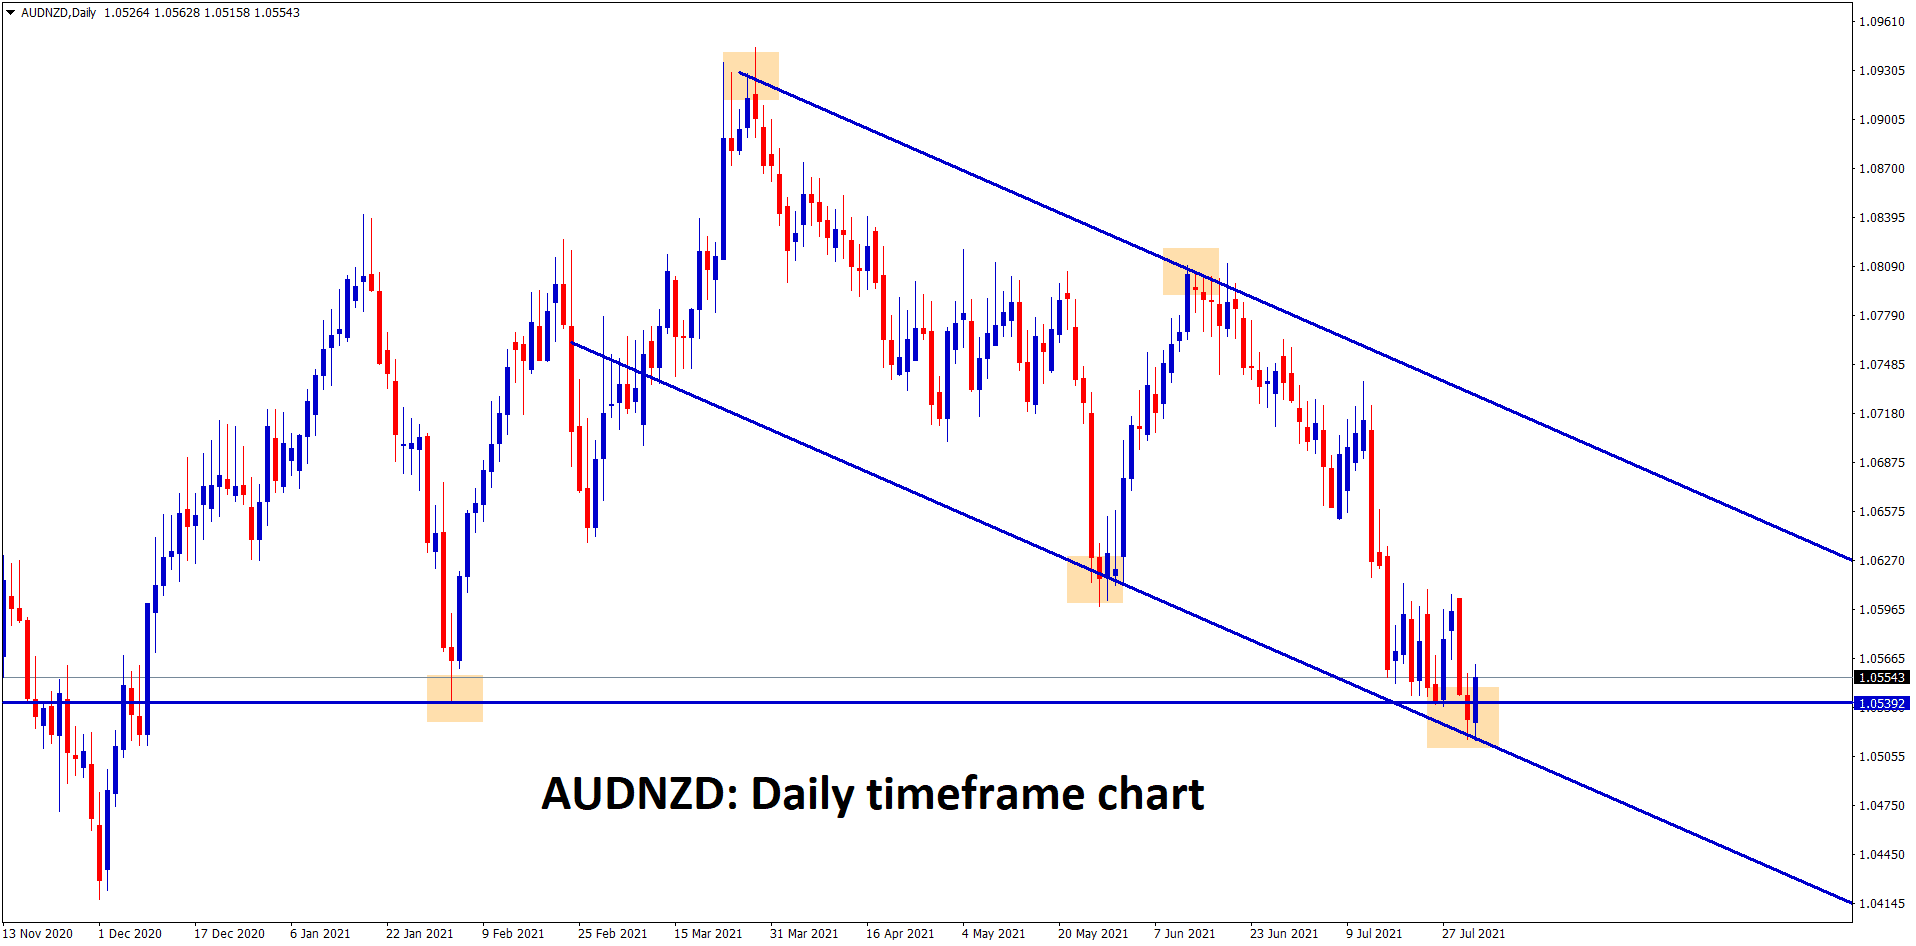 AUDNZD is standing at the support zone and the lower low level of the descending channel